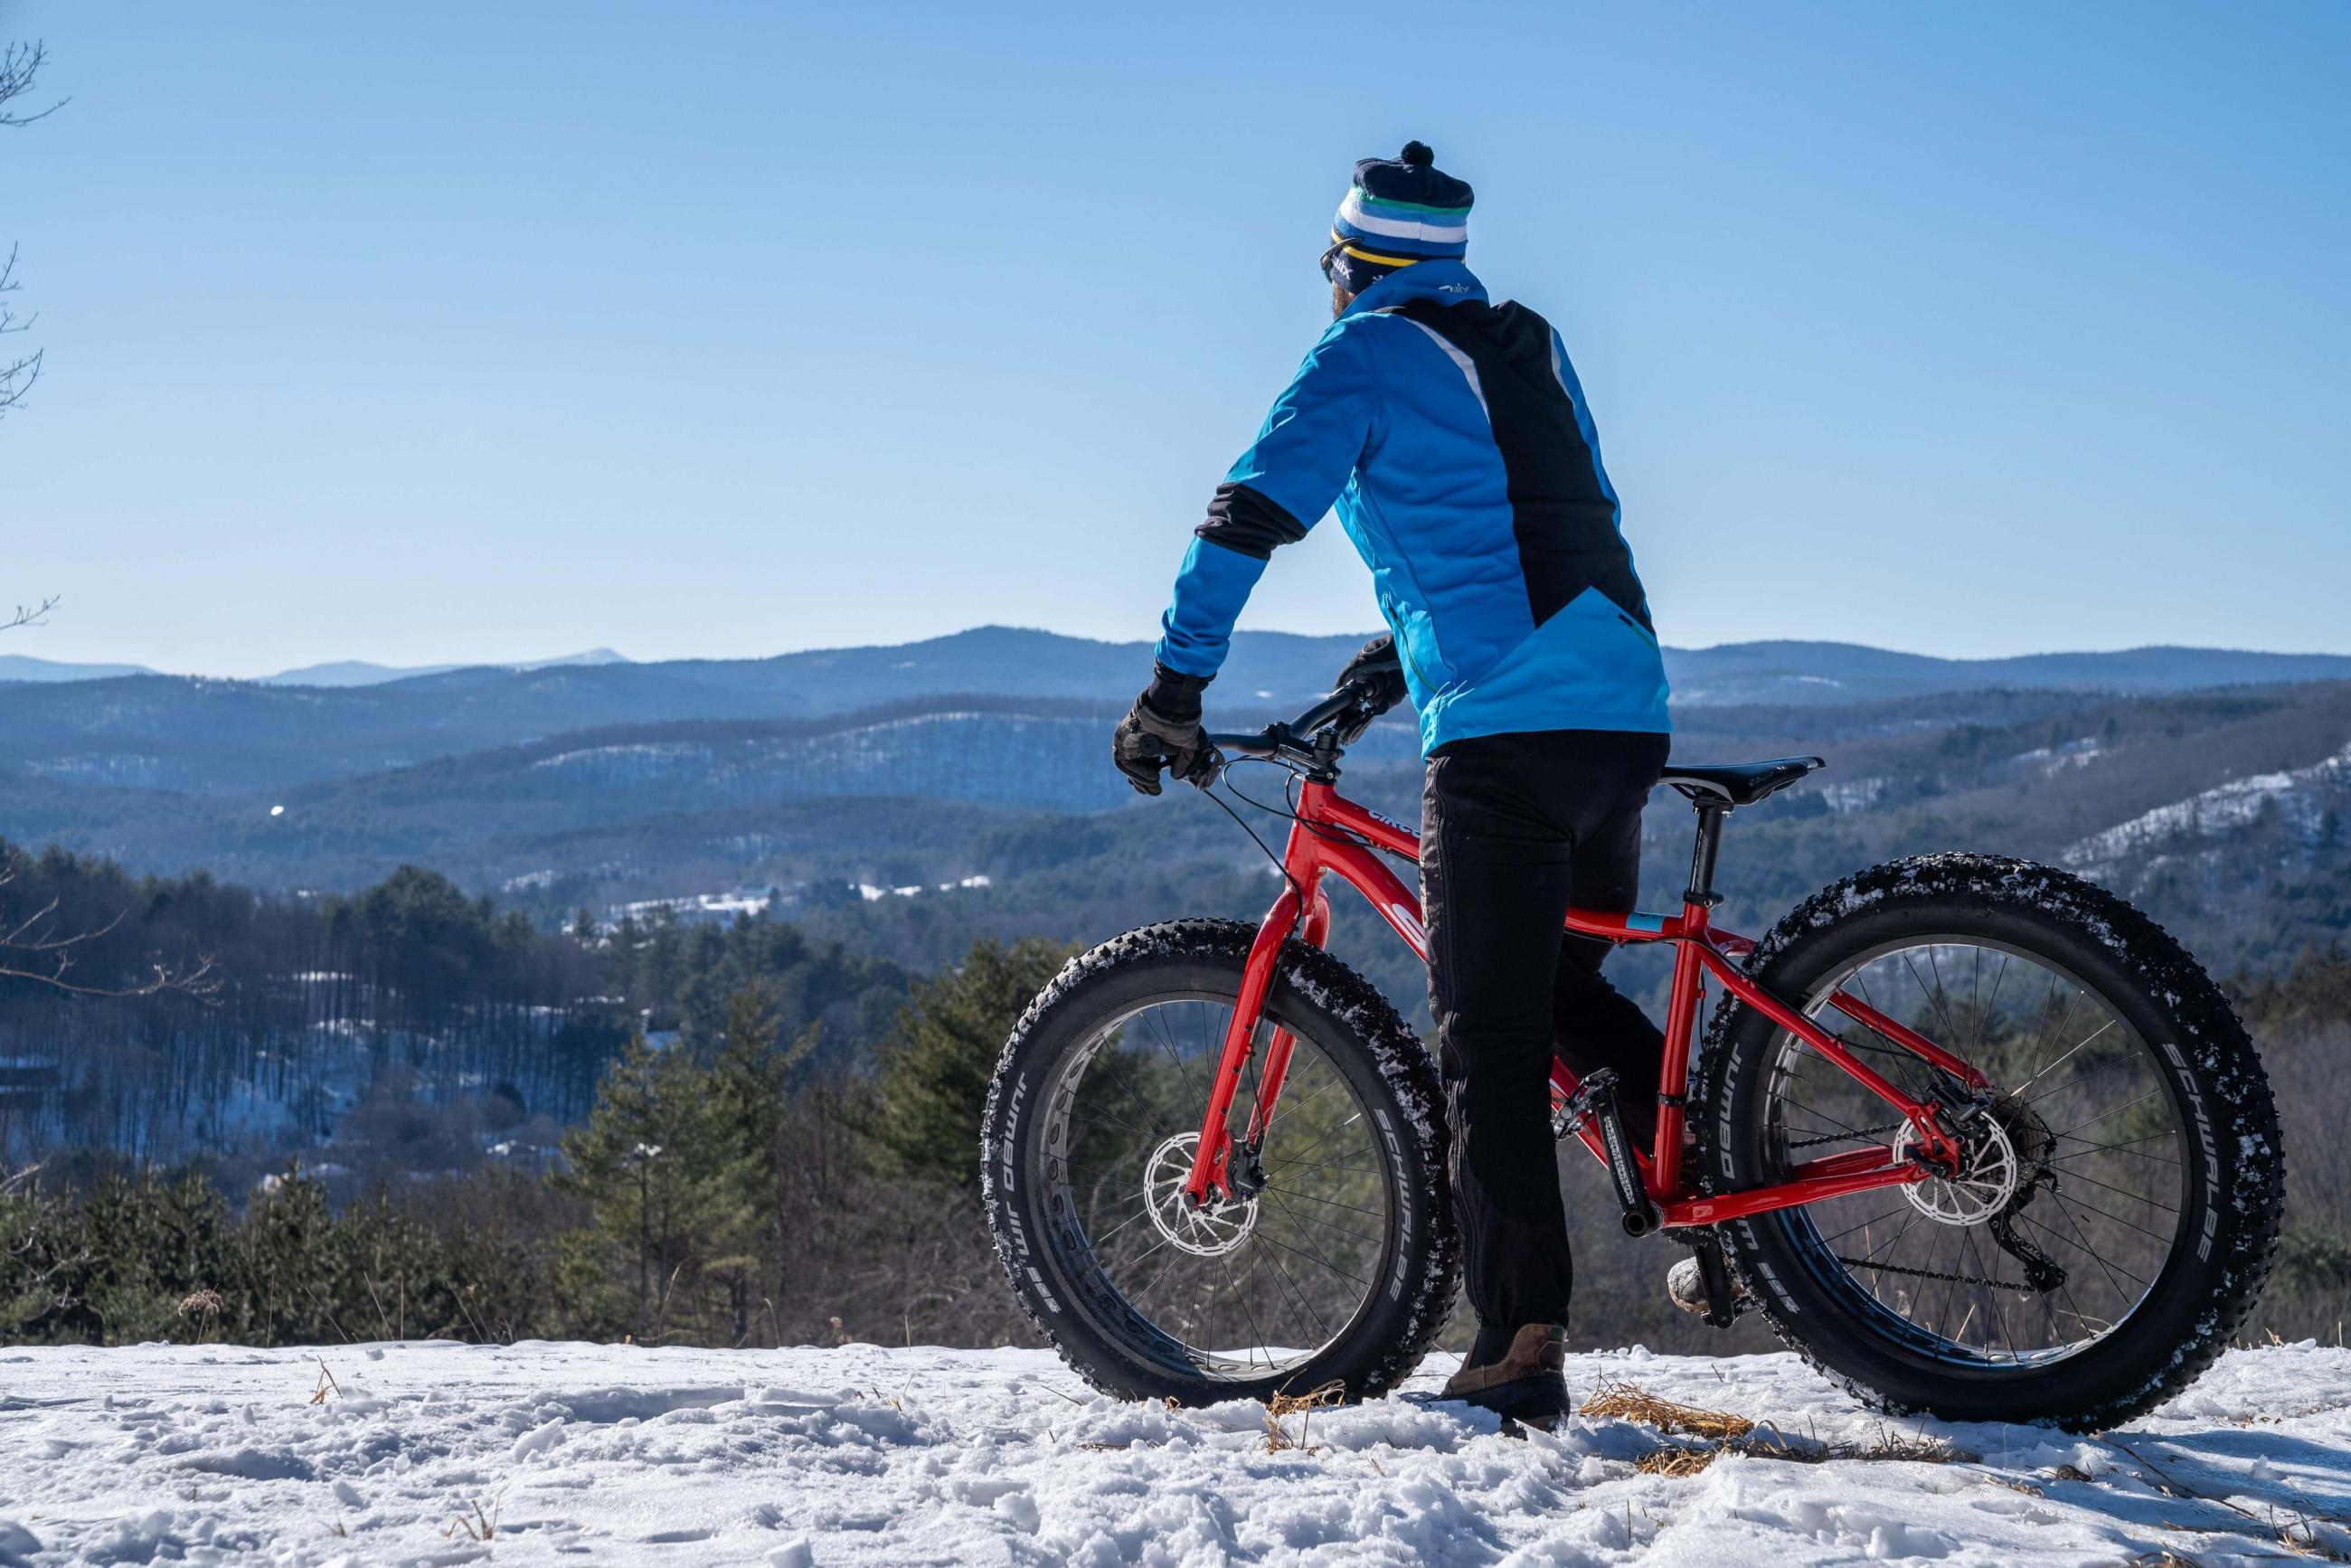 Tips for Biking in Bad Weather: Snow, Ice - and Winter Generally